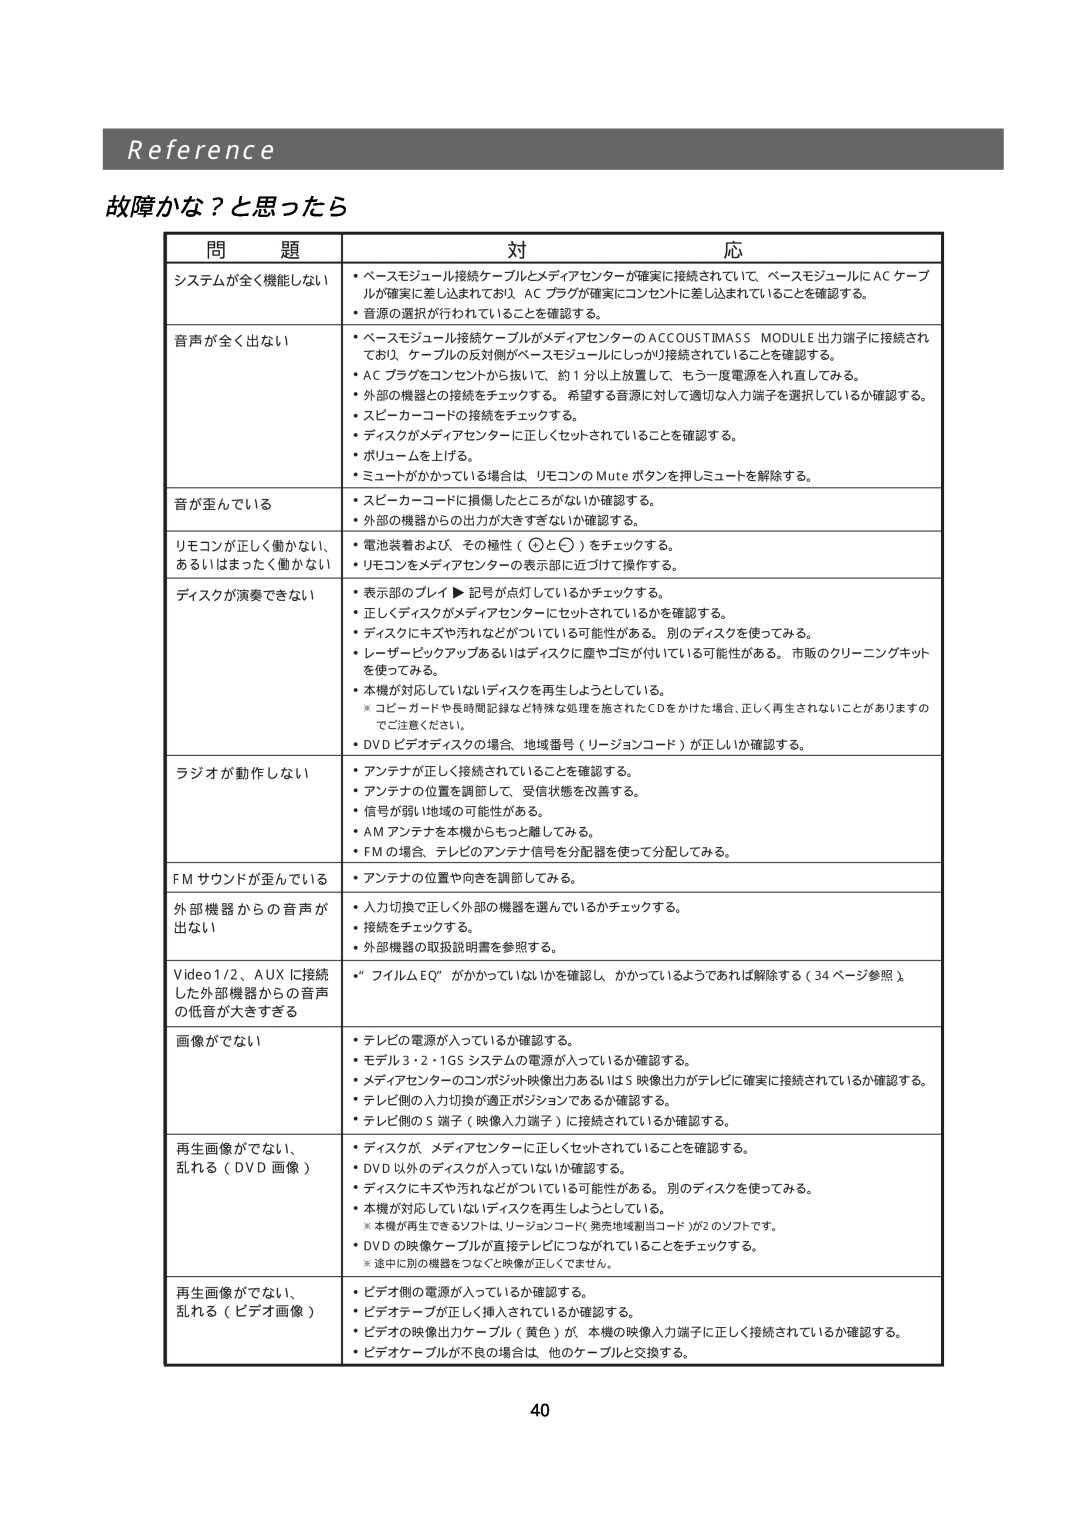 Bose 321GS owner manual 故障かな？と思ったら, Reference, Video1/2、AUX に接続 